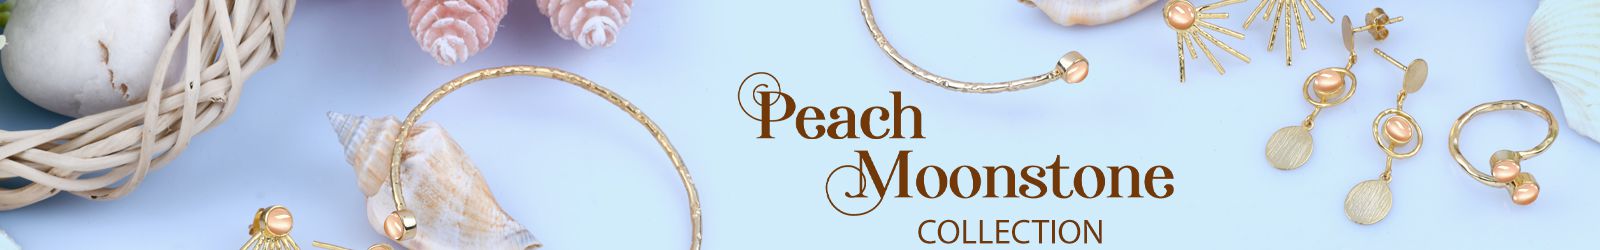 Silver Peach Moonstone Jewelry Wholesale Supplier